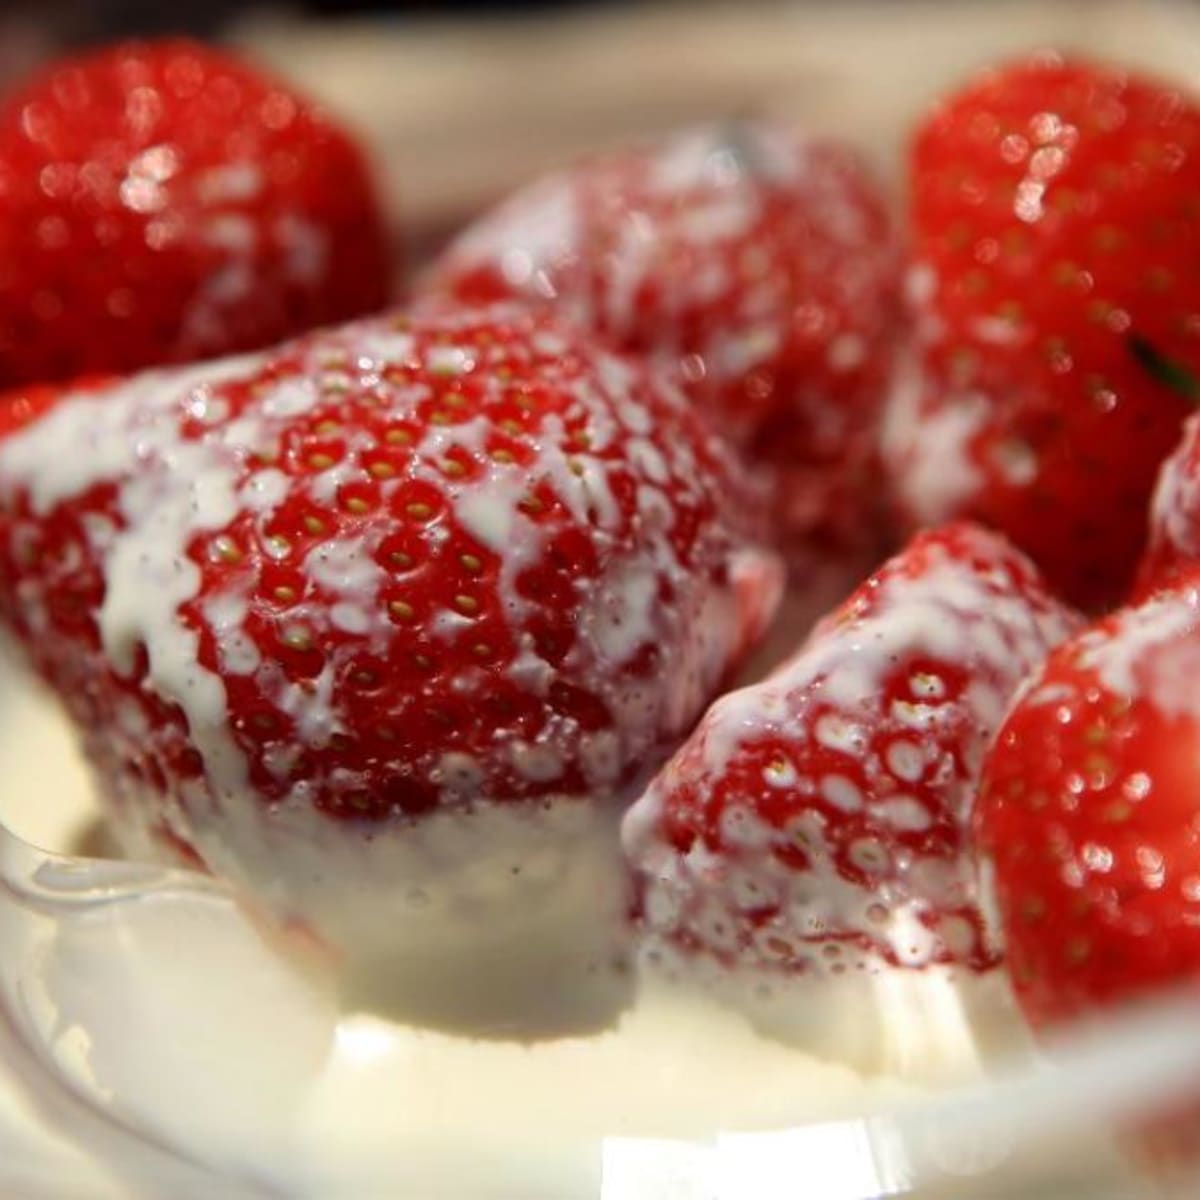 Wimbledon S Strawberries And Cream Are Not A Great Snack Sports Illustrated